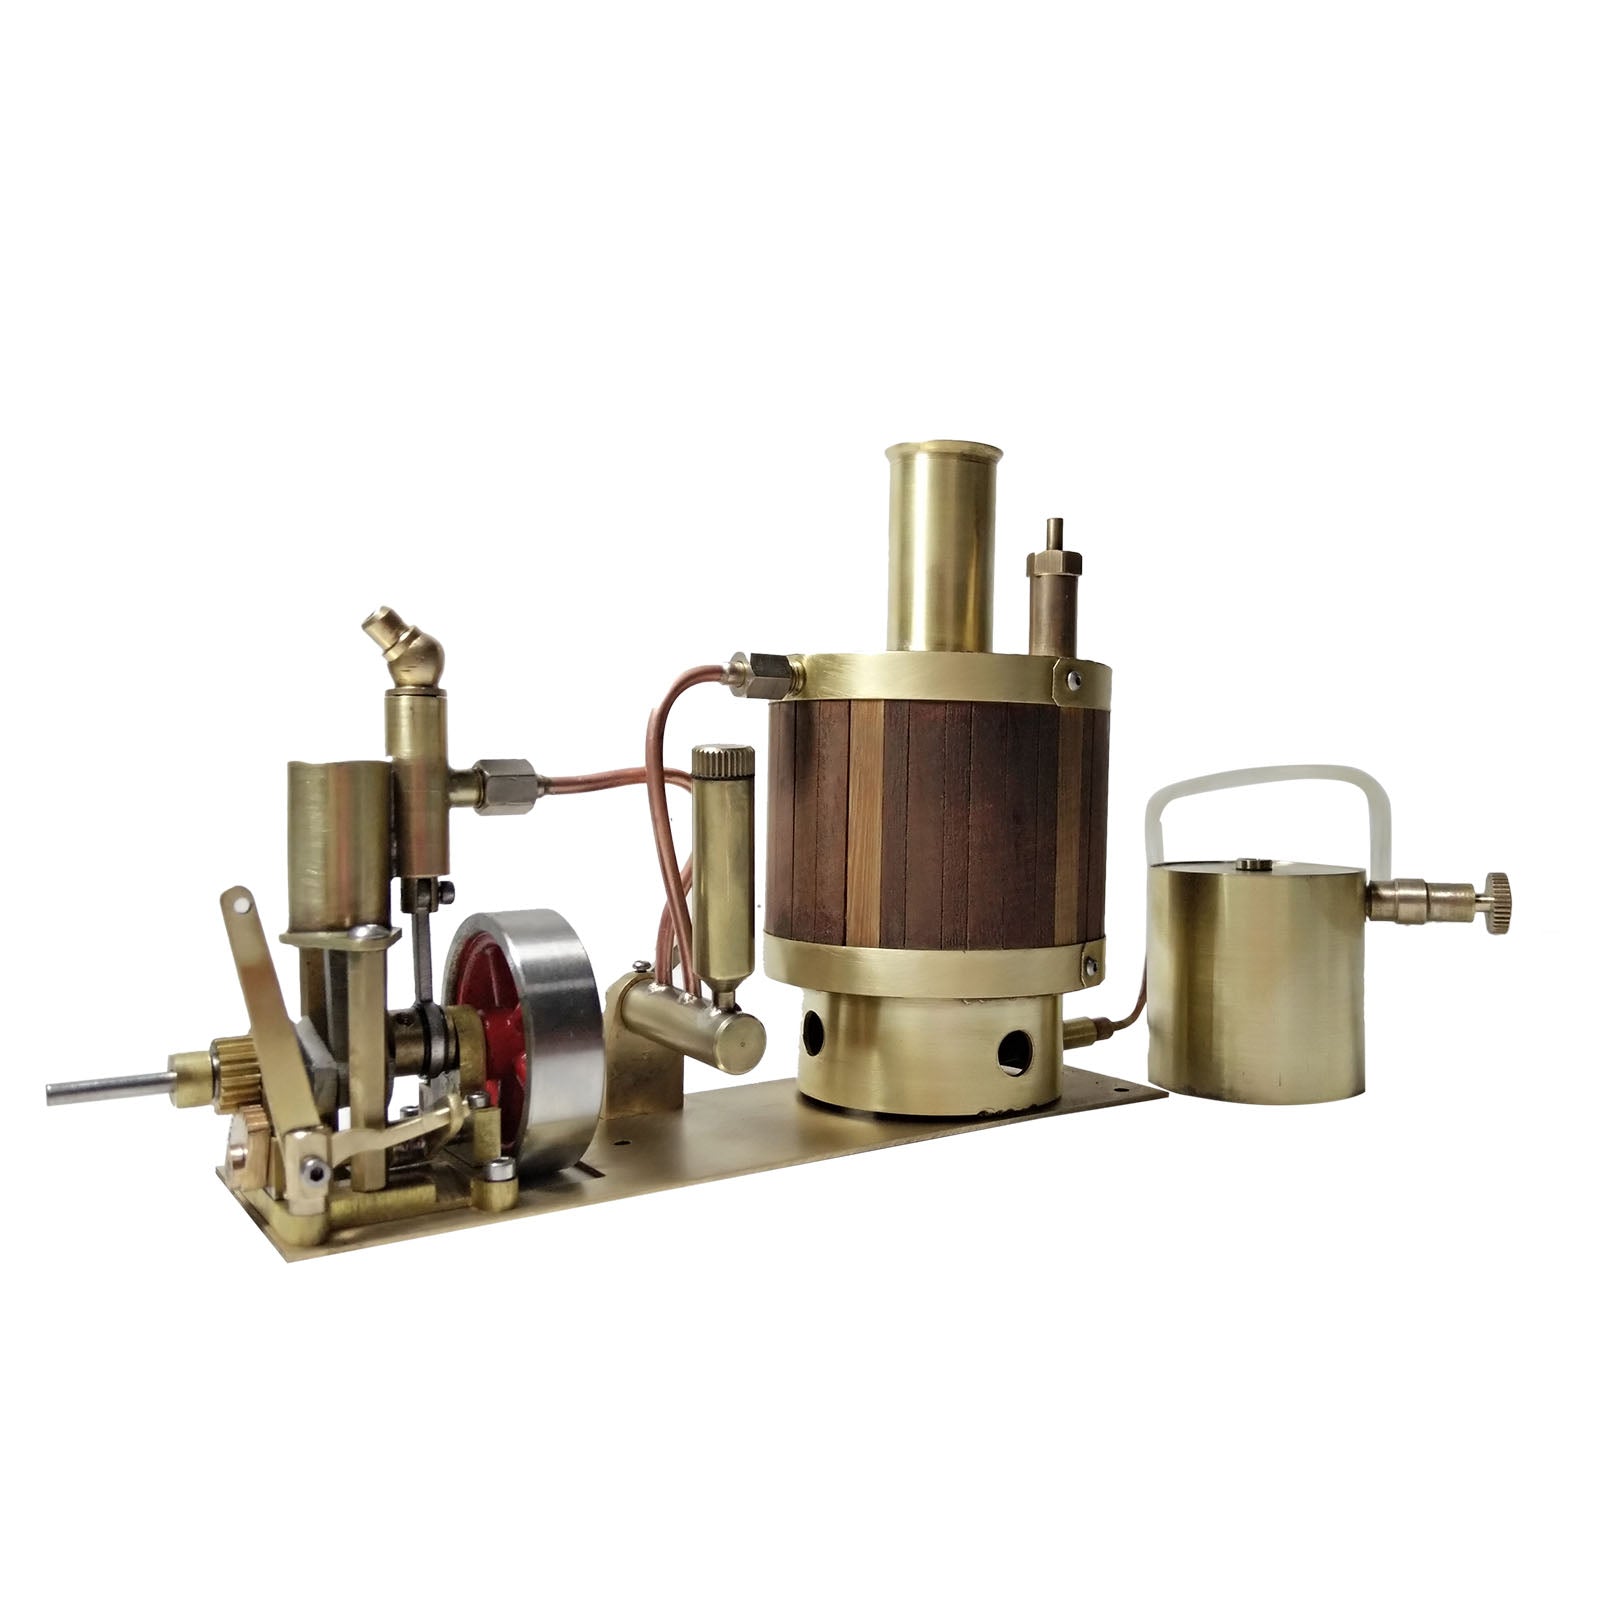 Mini Single-cylinder Steam Engine Set with Boiler for Model Ship within 50cm - enginediy